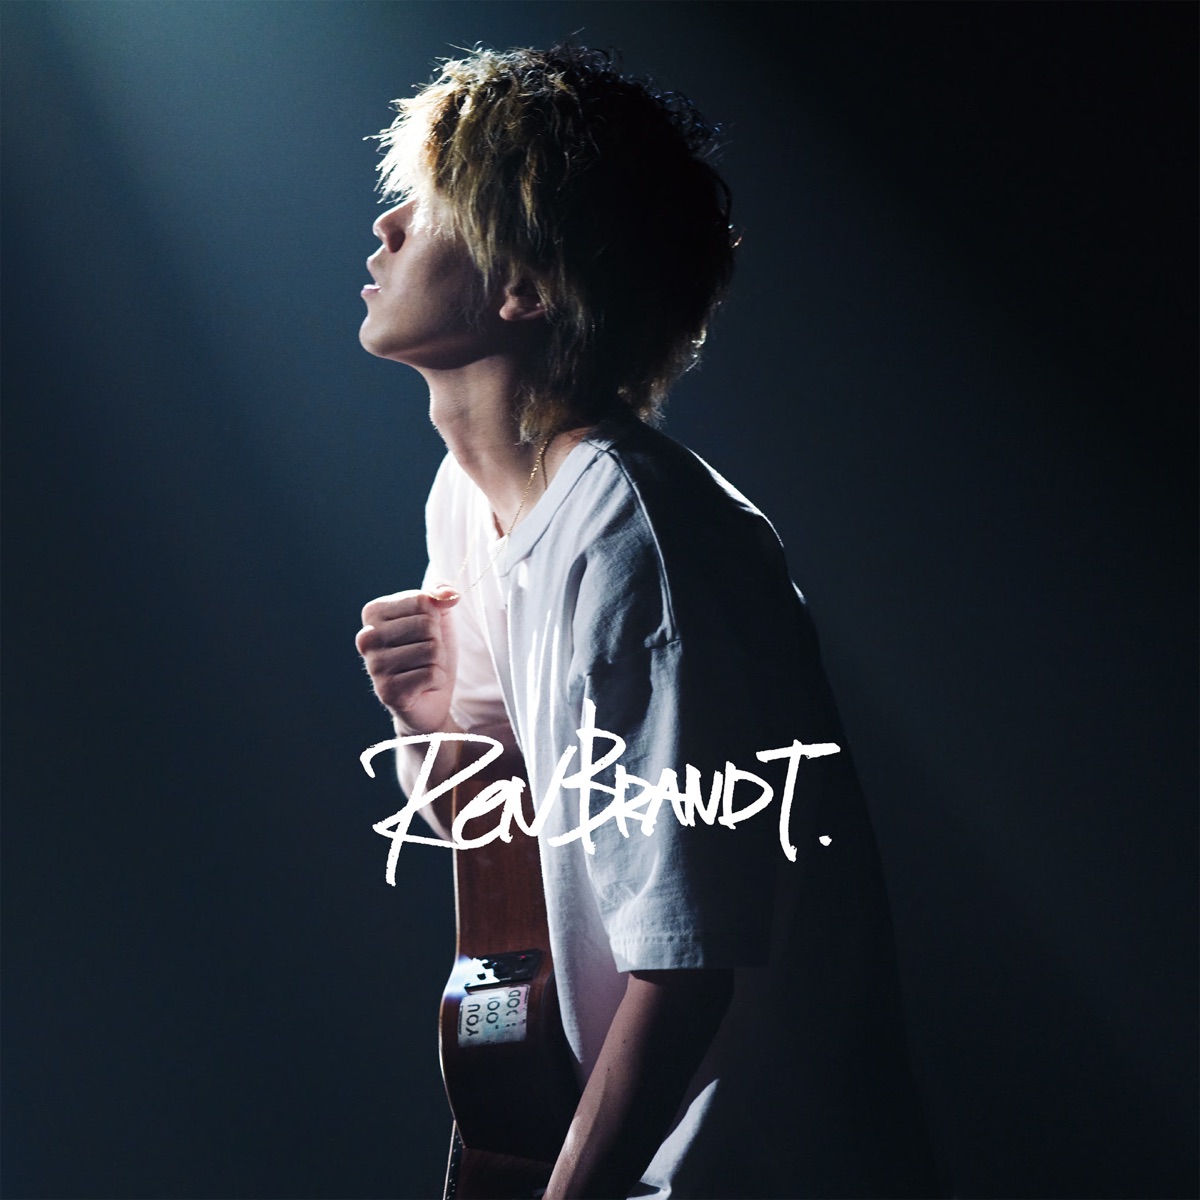 Cover art for『ReN - City Lights』from the release『ReNBRANDT